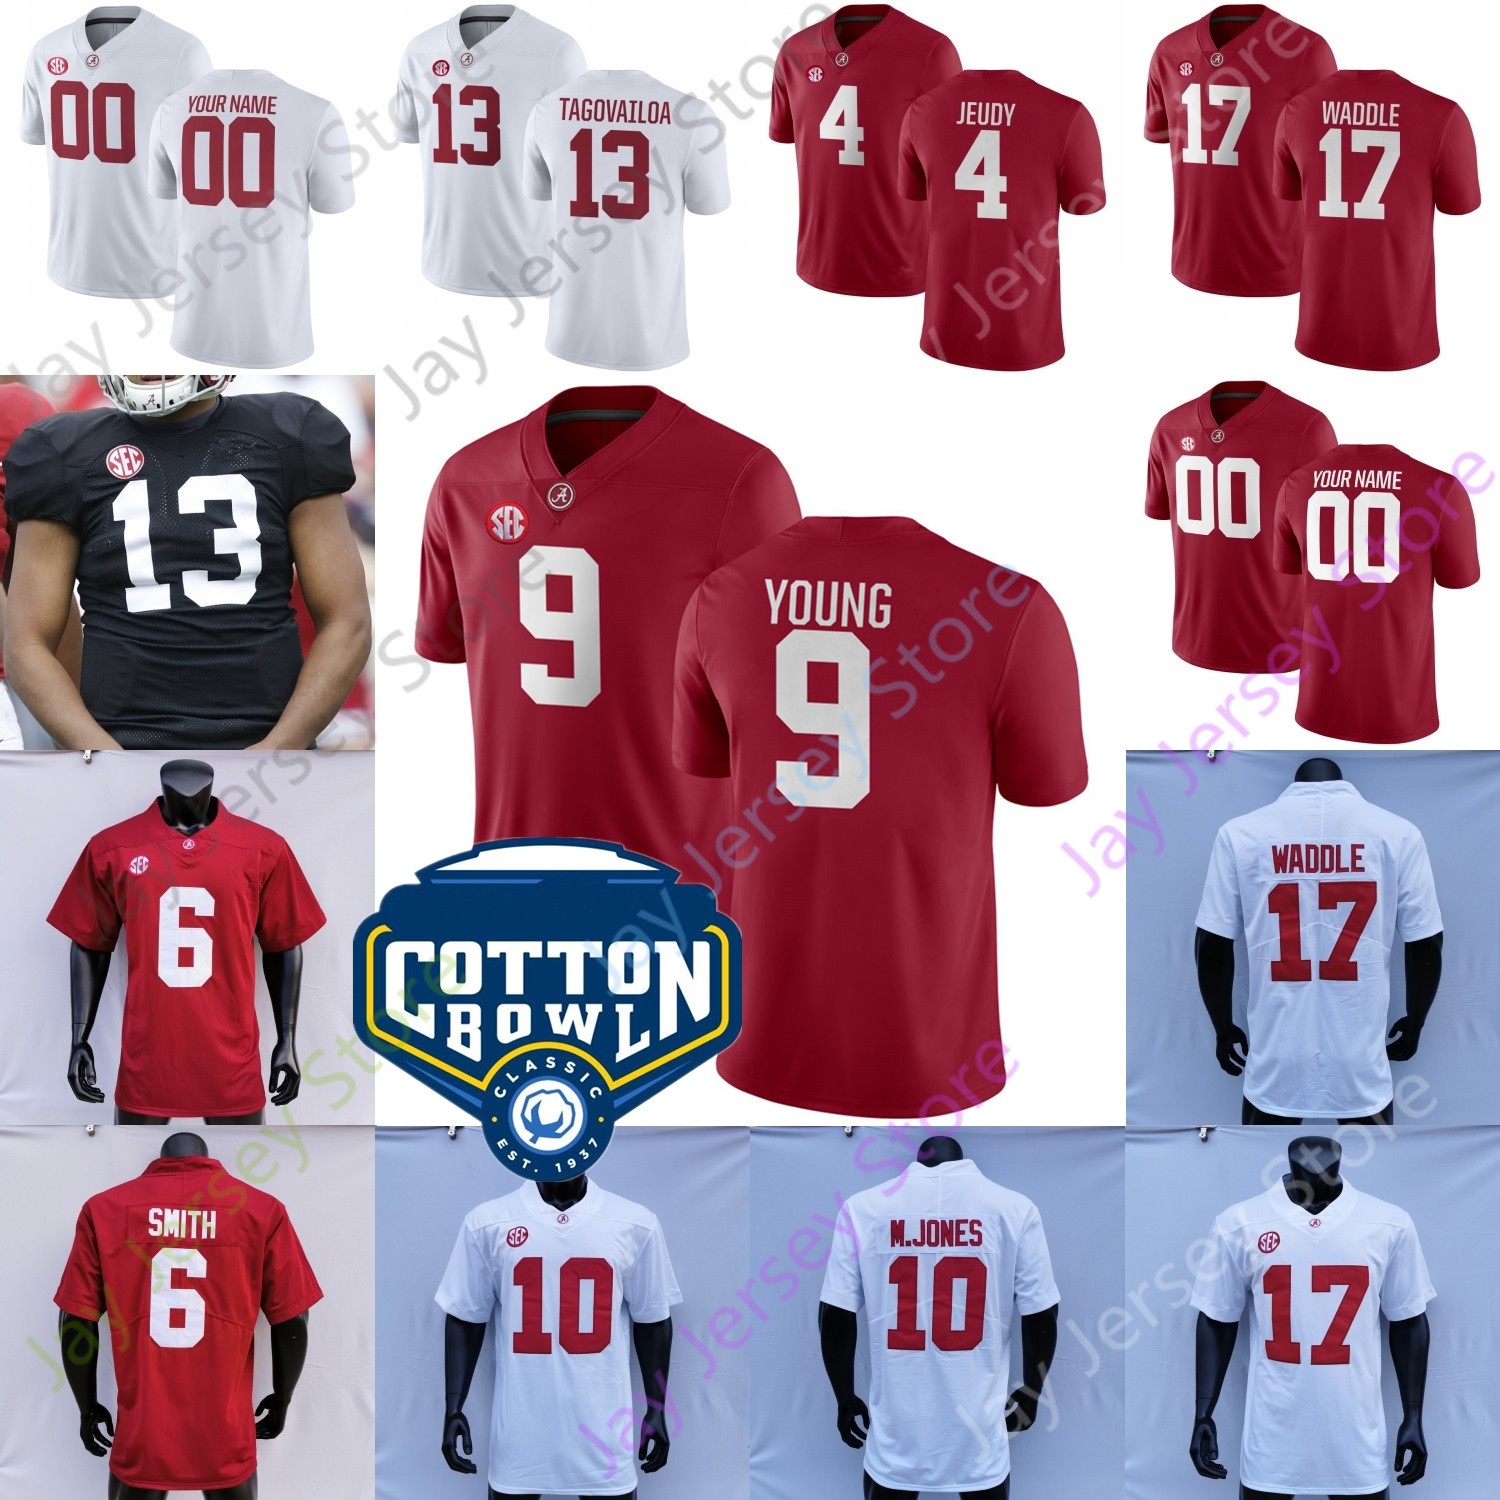 

Cotton Bowl Alabama Crimson Tide Football Jersey College Bryce Young Brian Robinson Jr. Will Anderson Jr. McKinstry John Metchie III Jameson Williams Sanders To'oTo'o, White orange patch